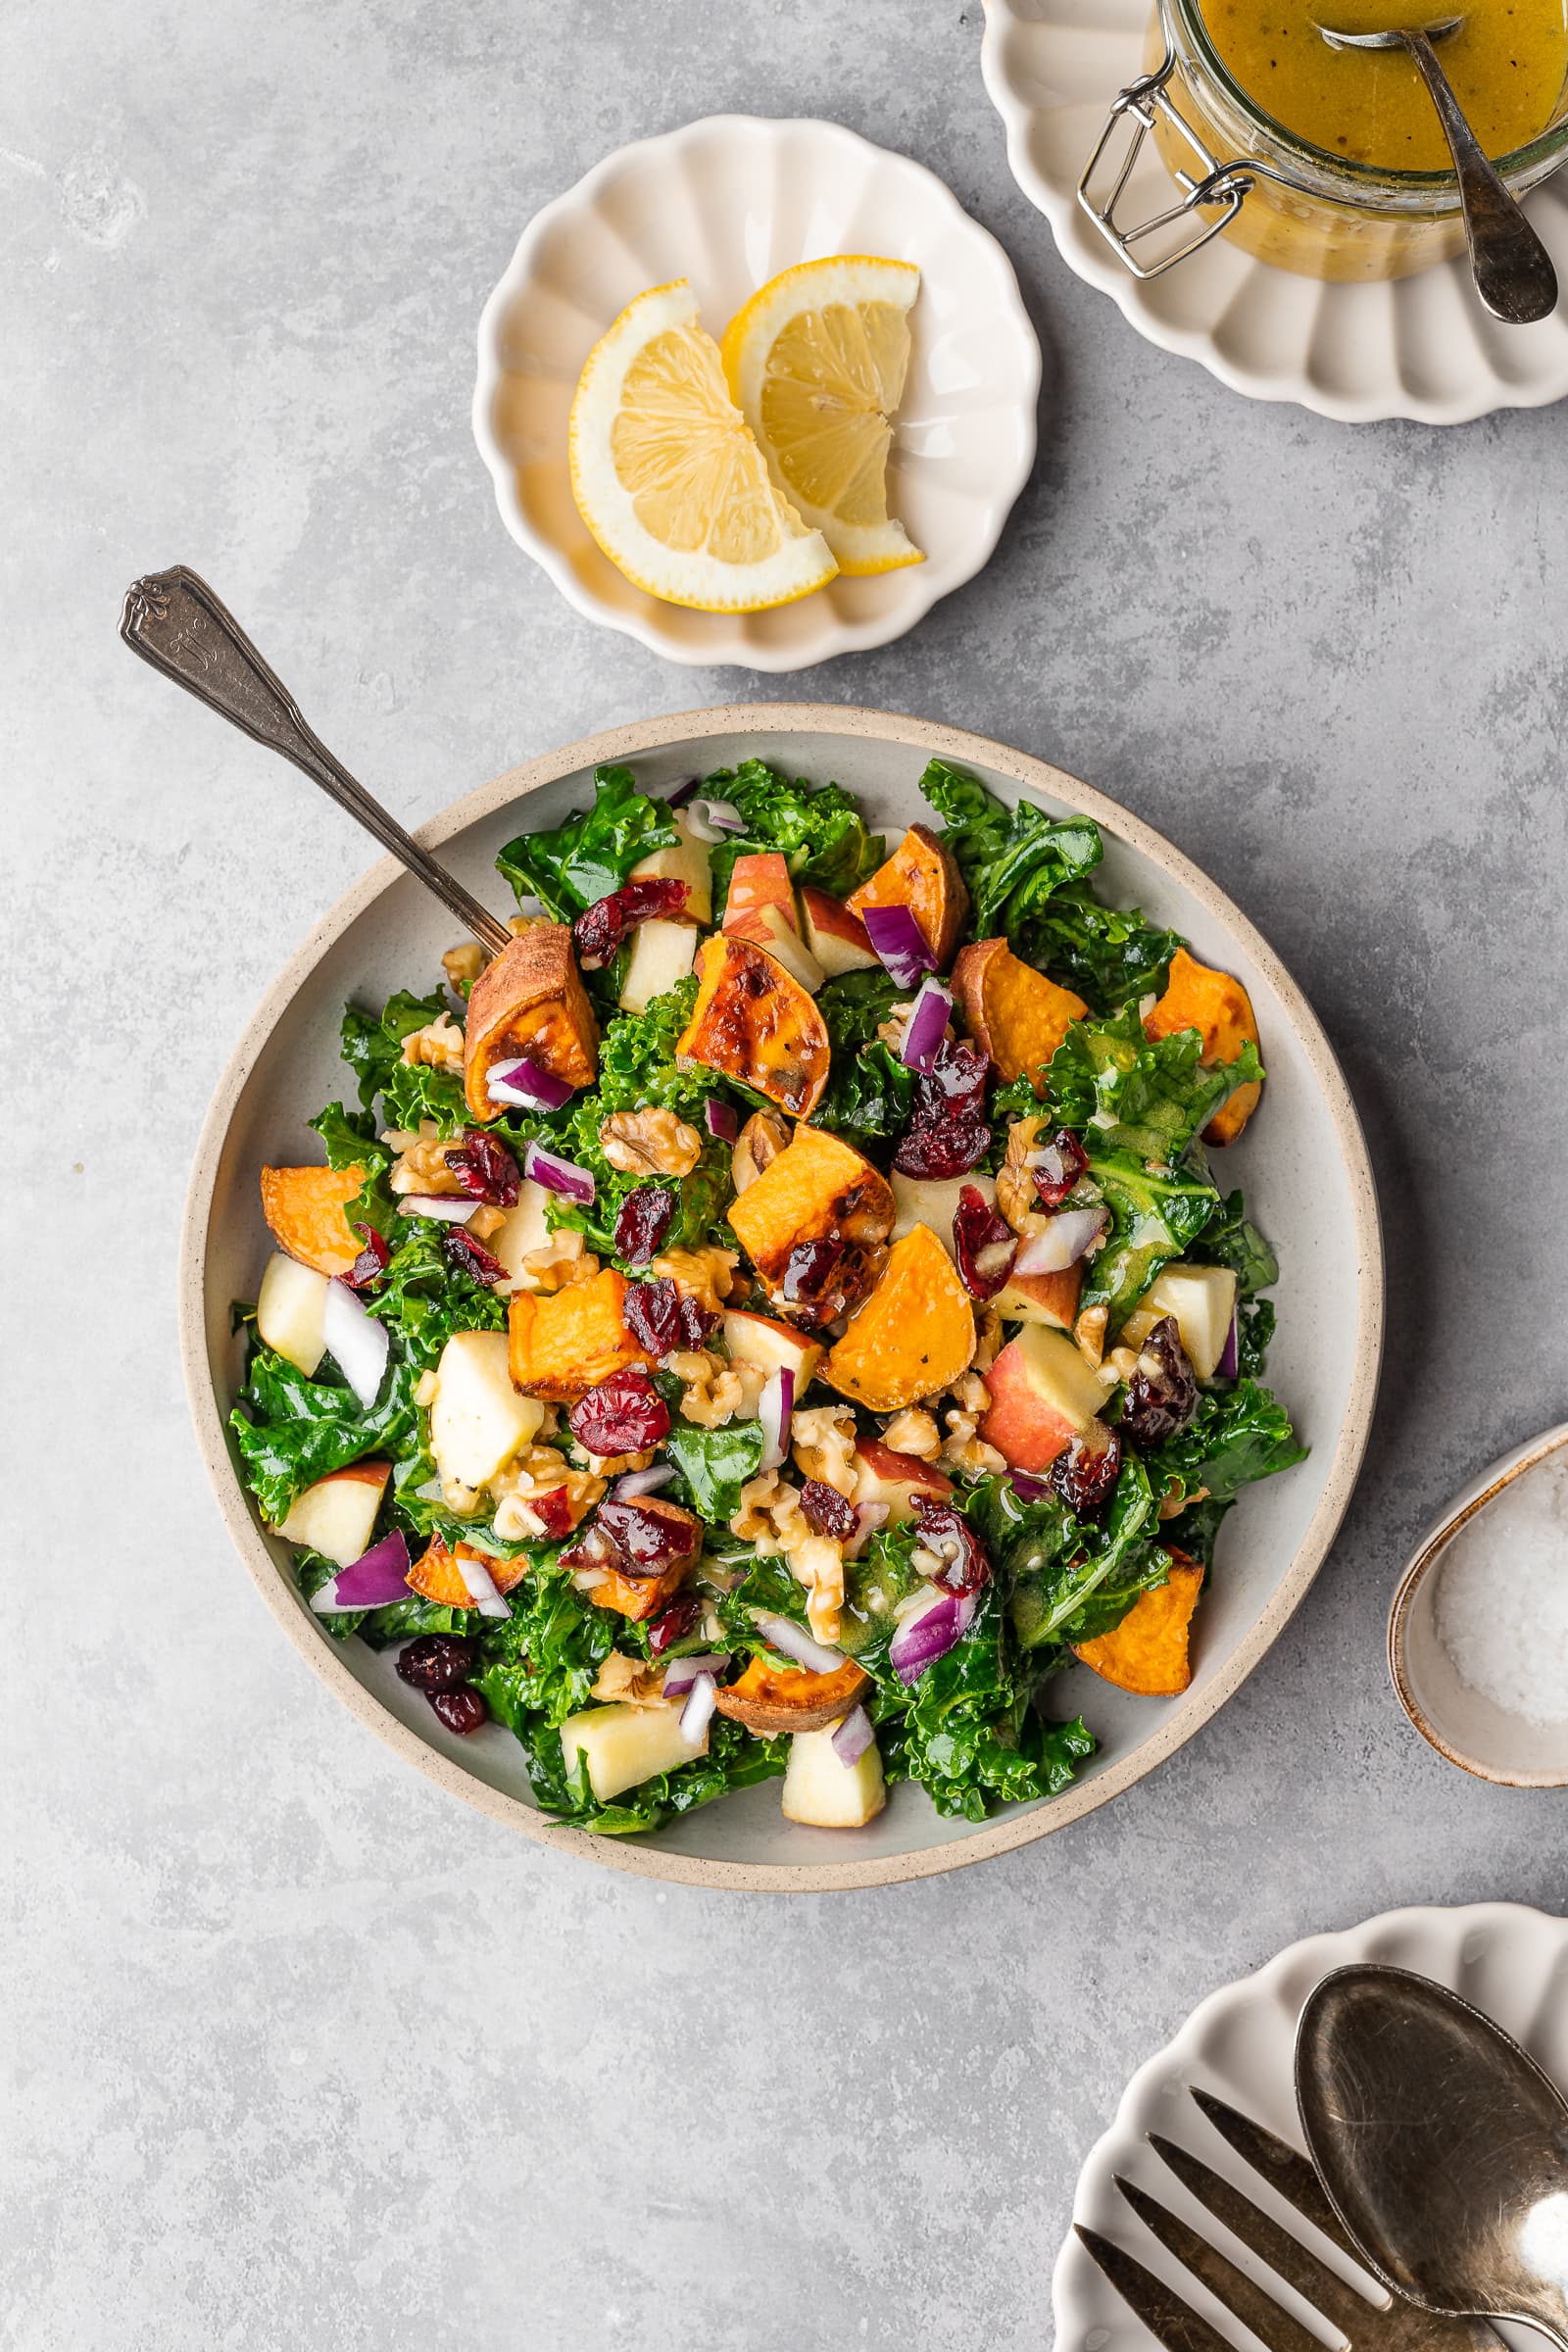 Kale salad with maple mustard dressing, sweet potatoes, apples, and cranberries.